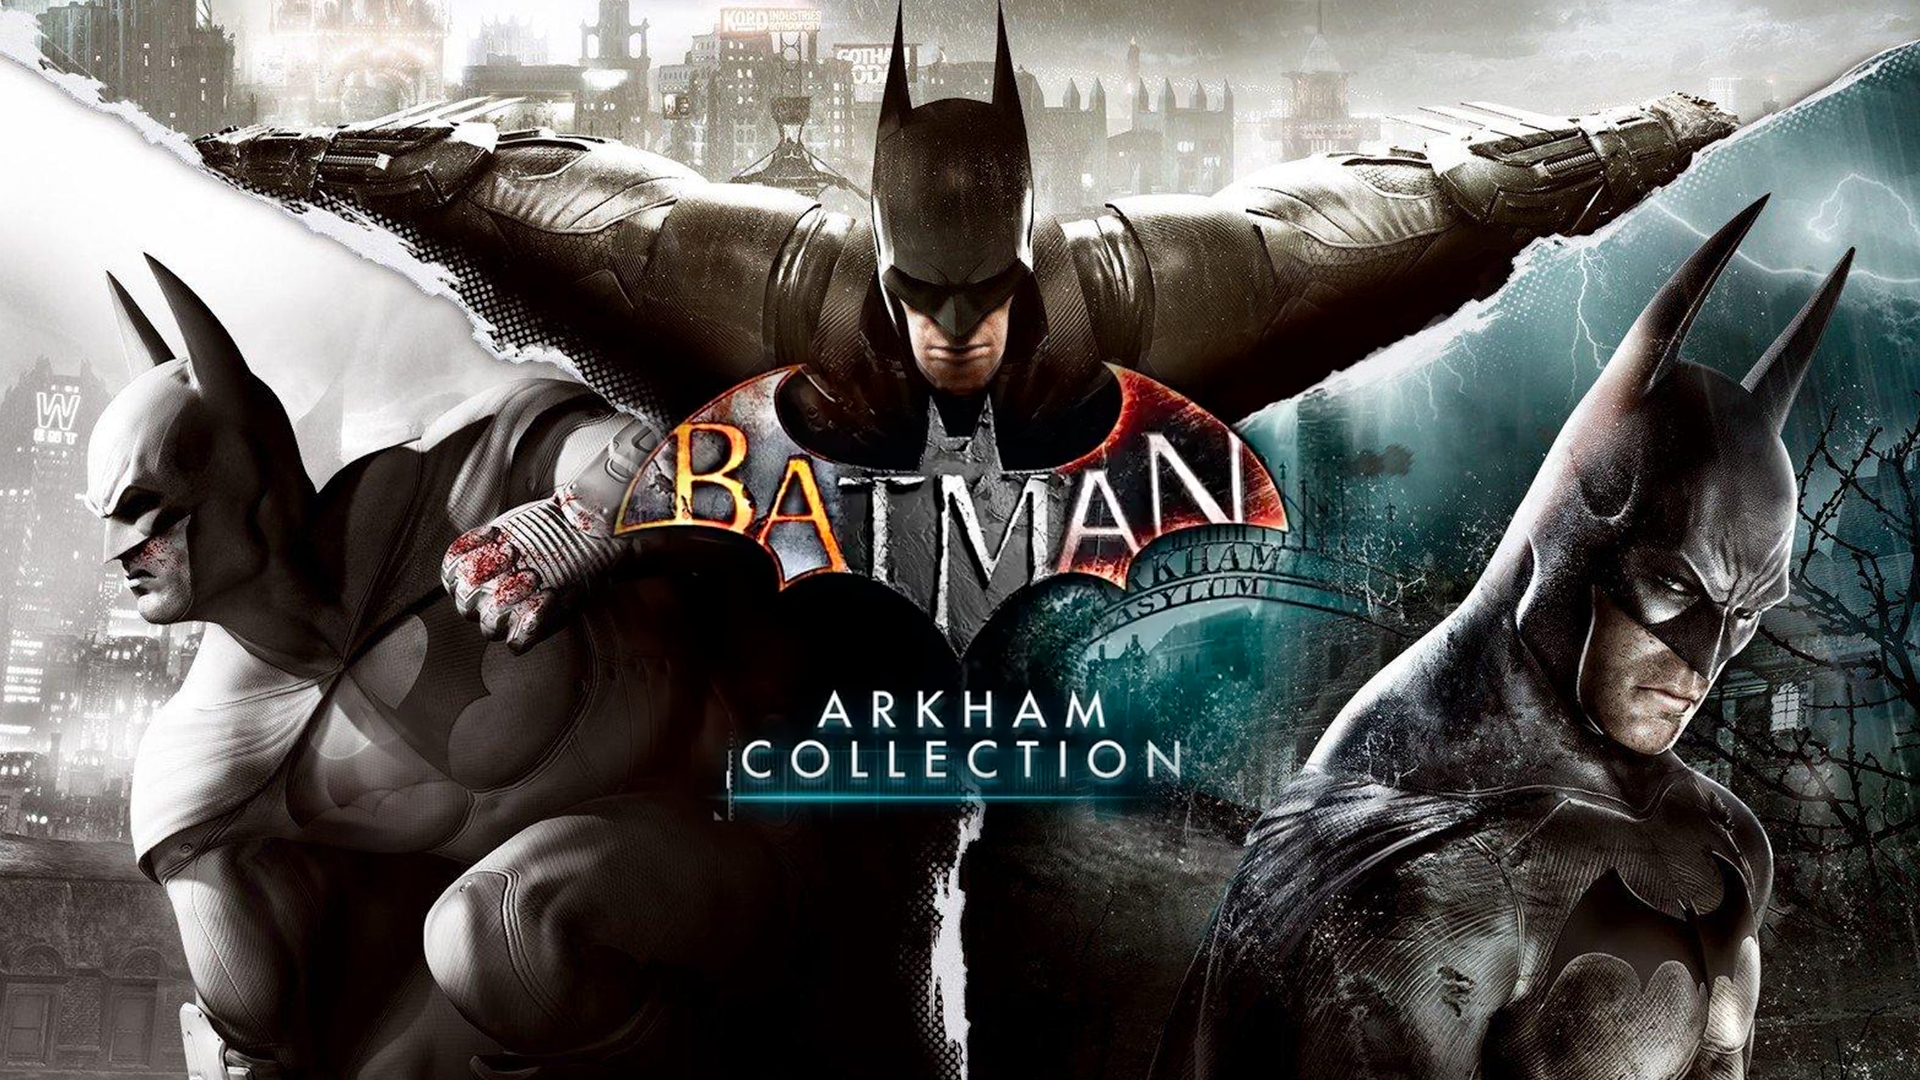 Batman: Return to Arkham launches this Friday on PS4/Xbox One